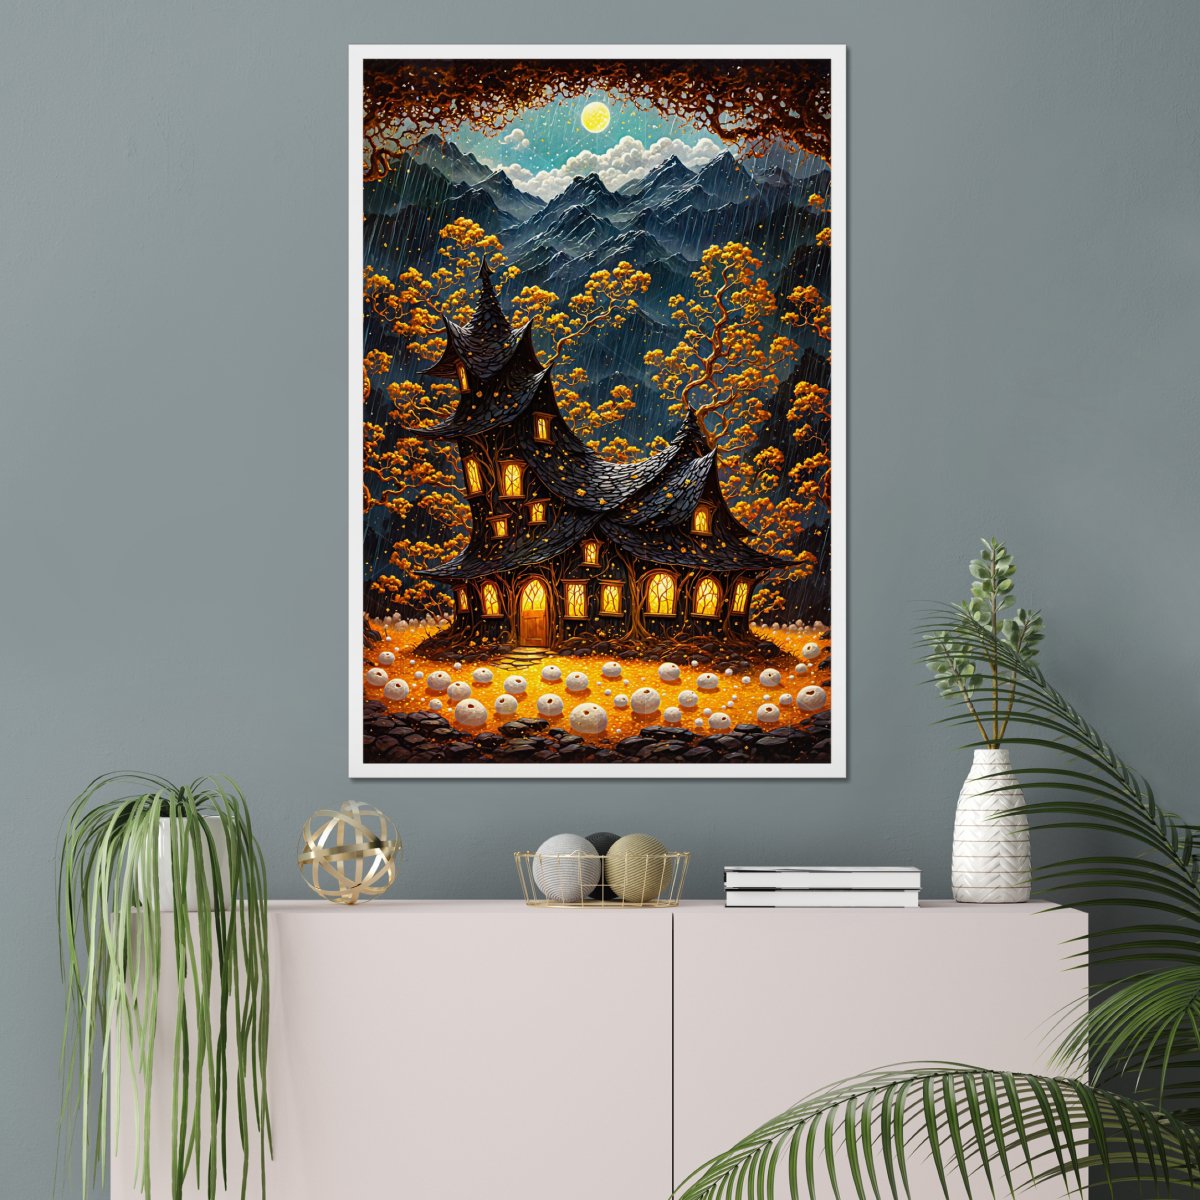 Amber drops - Art print - Poster - Ever colorful